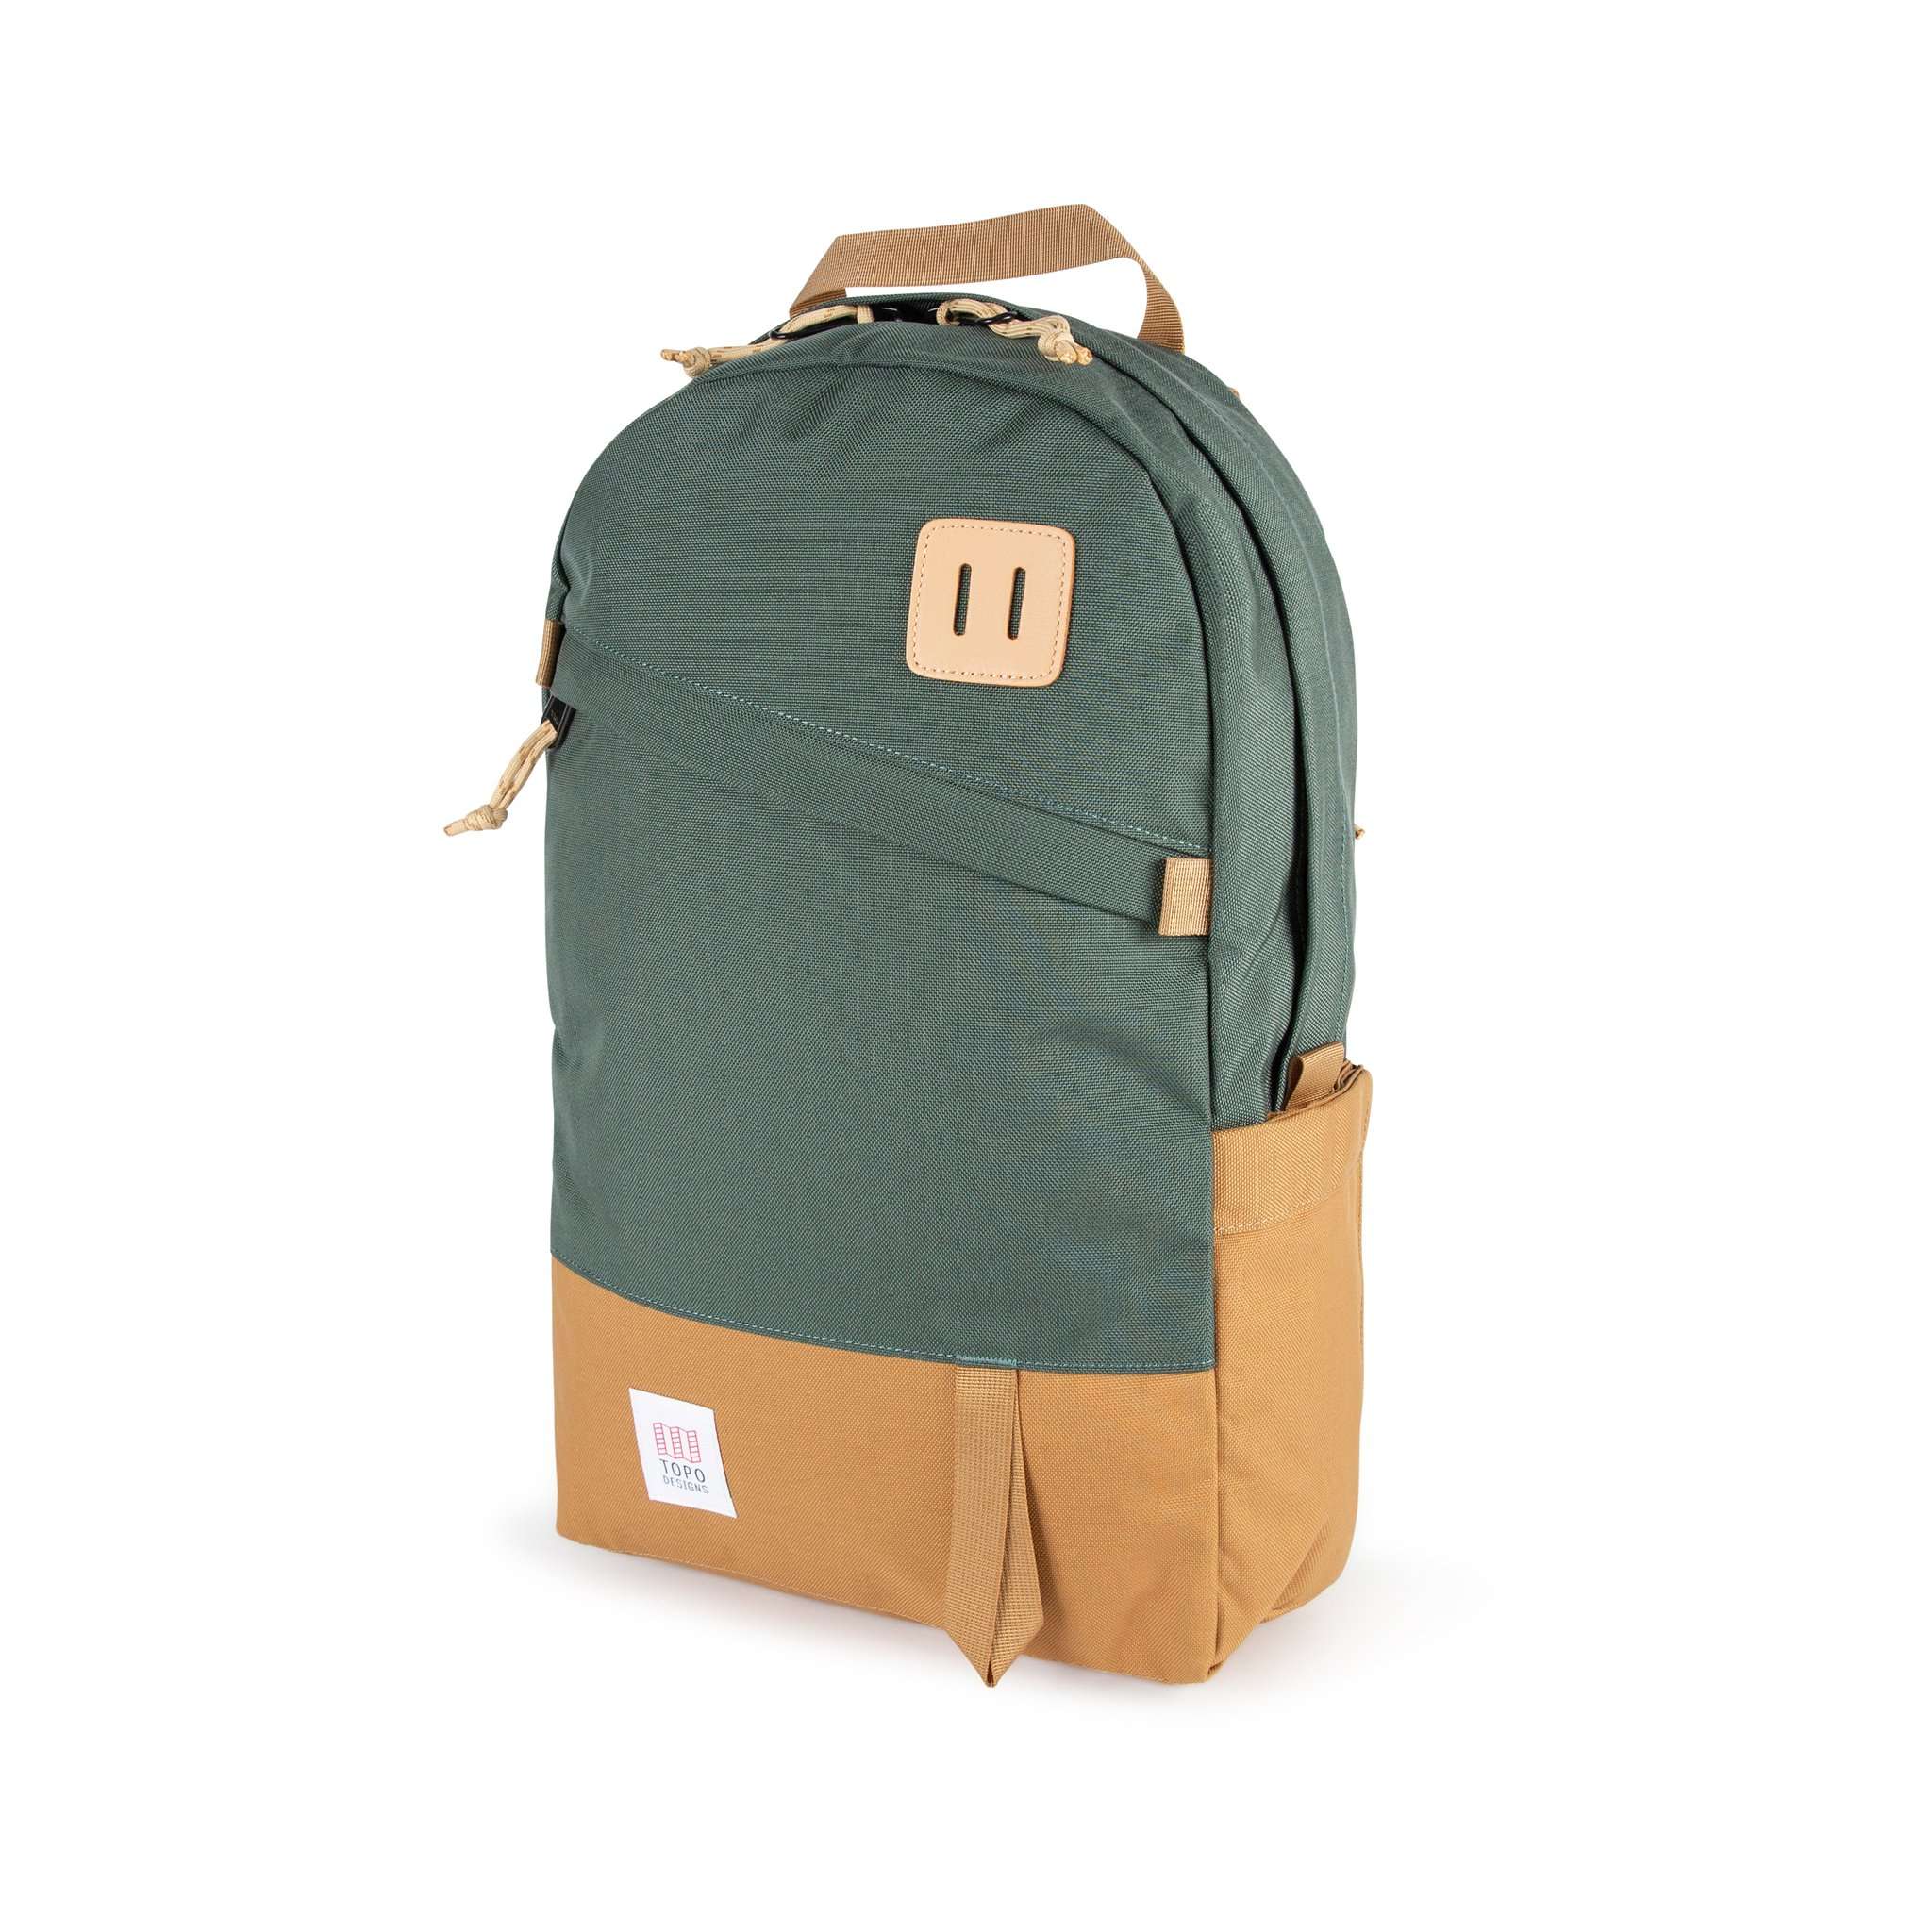 Topo Designs Backpacks Review - Must Read This Before Buying